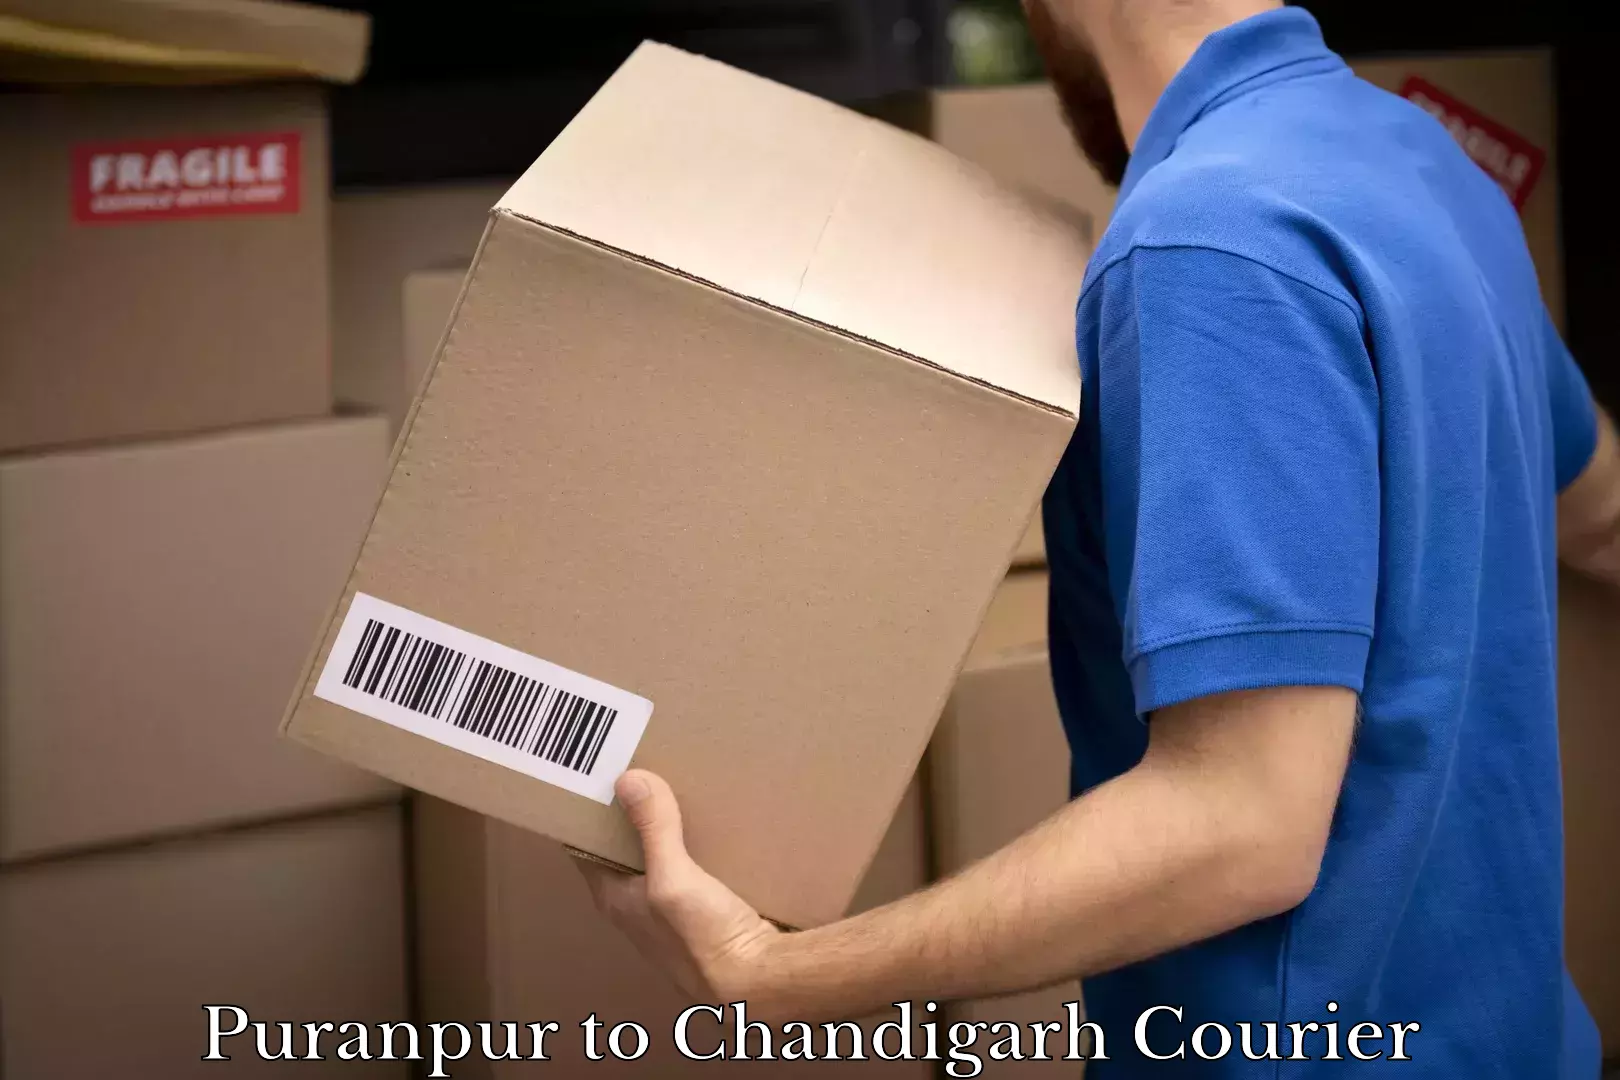 State-of-the-art courier technology Puranpur to Chandigarh